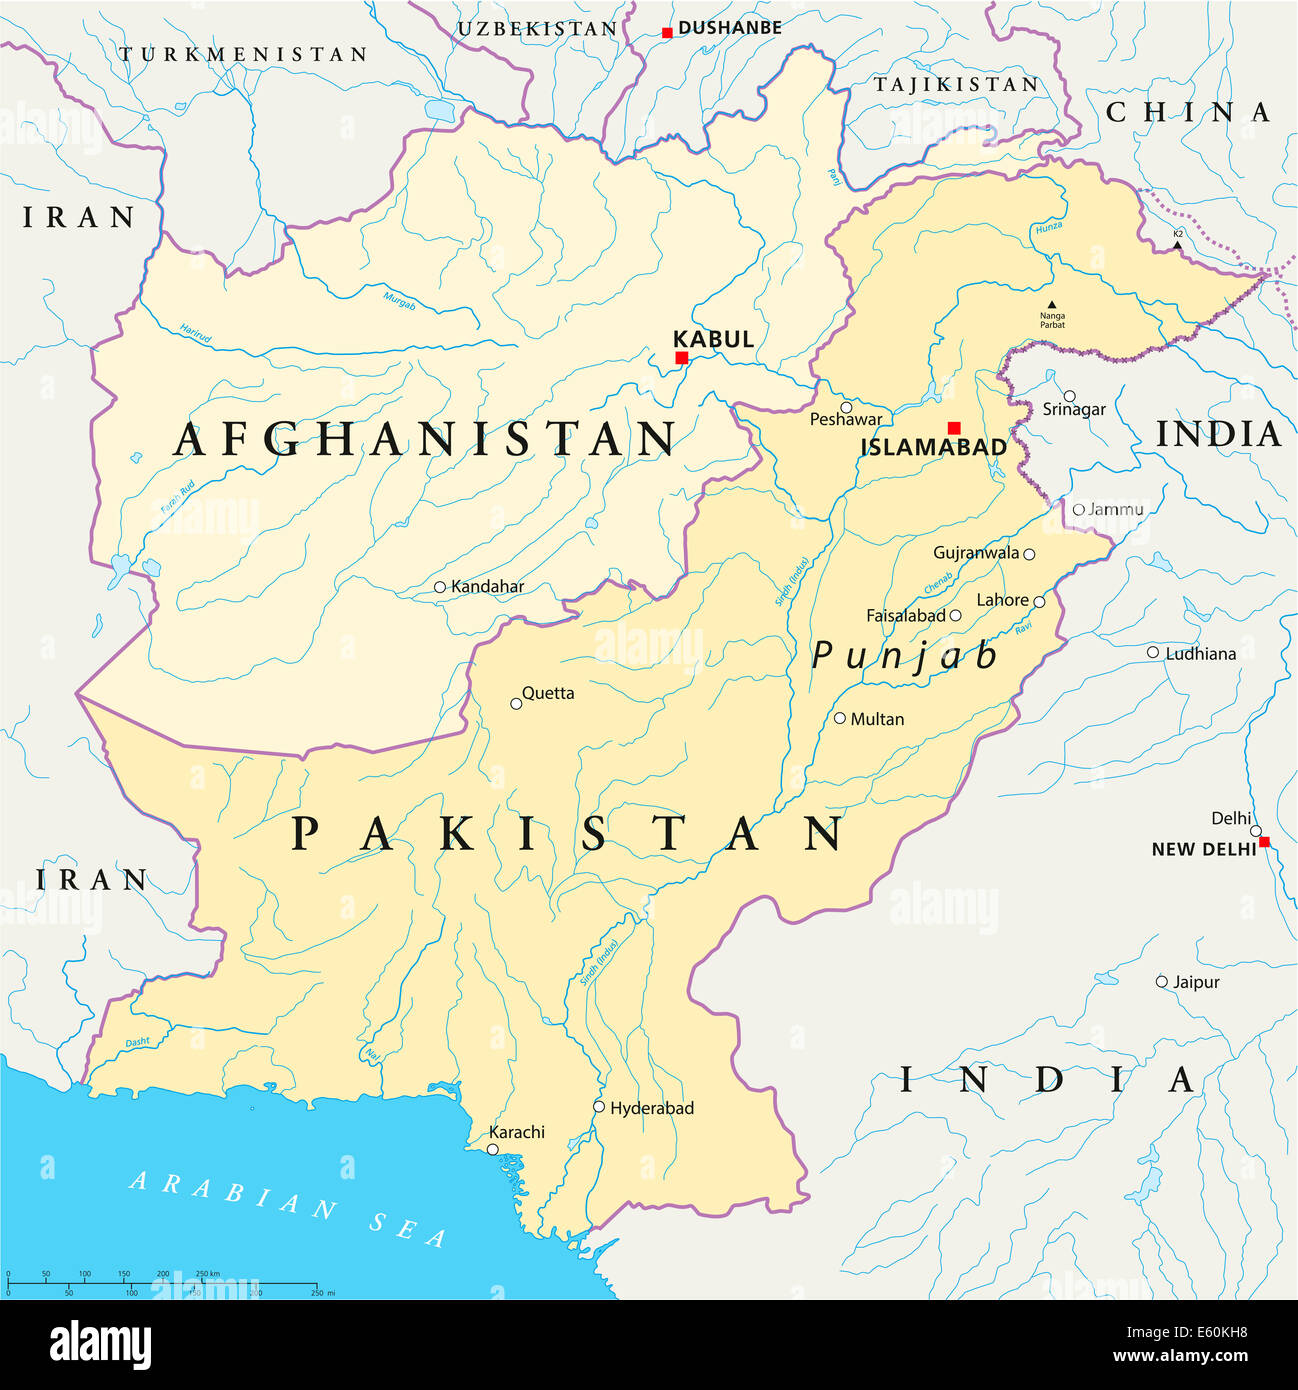 Afghanistan and Pakistan Political Map Stock Photo